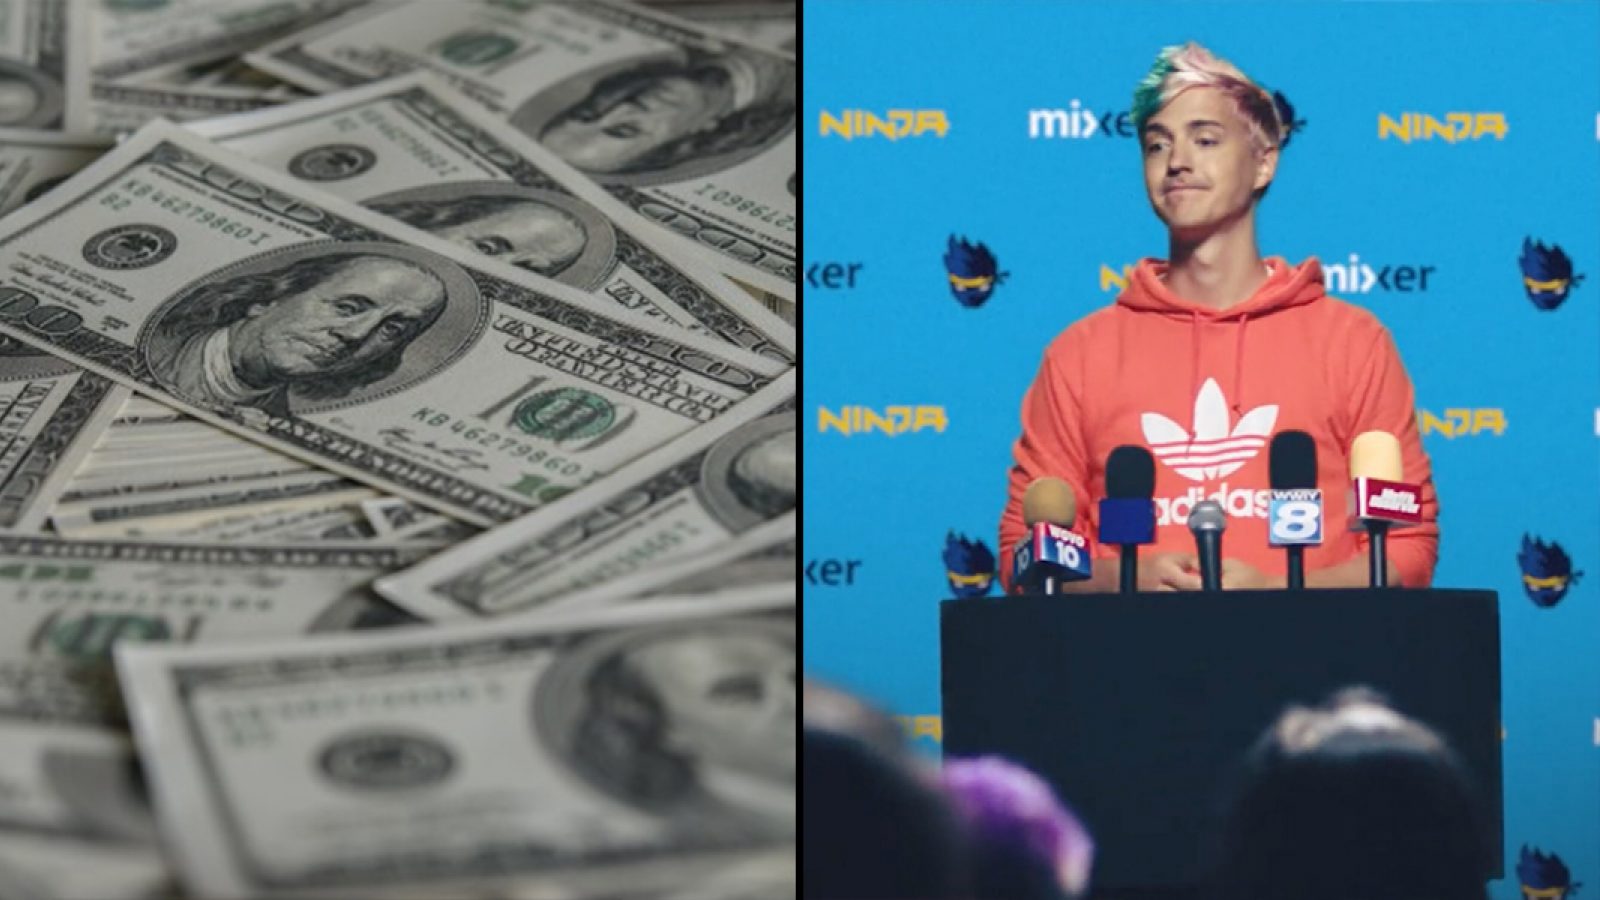 Ninja to claims that he only to Mixer for money Dexerto